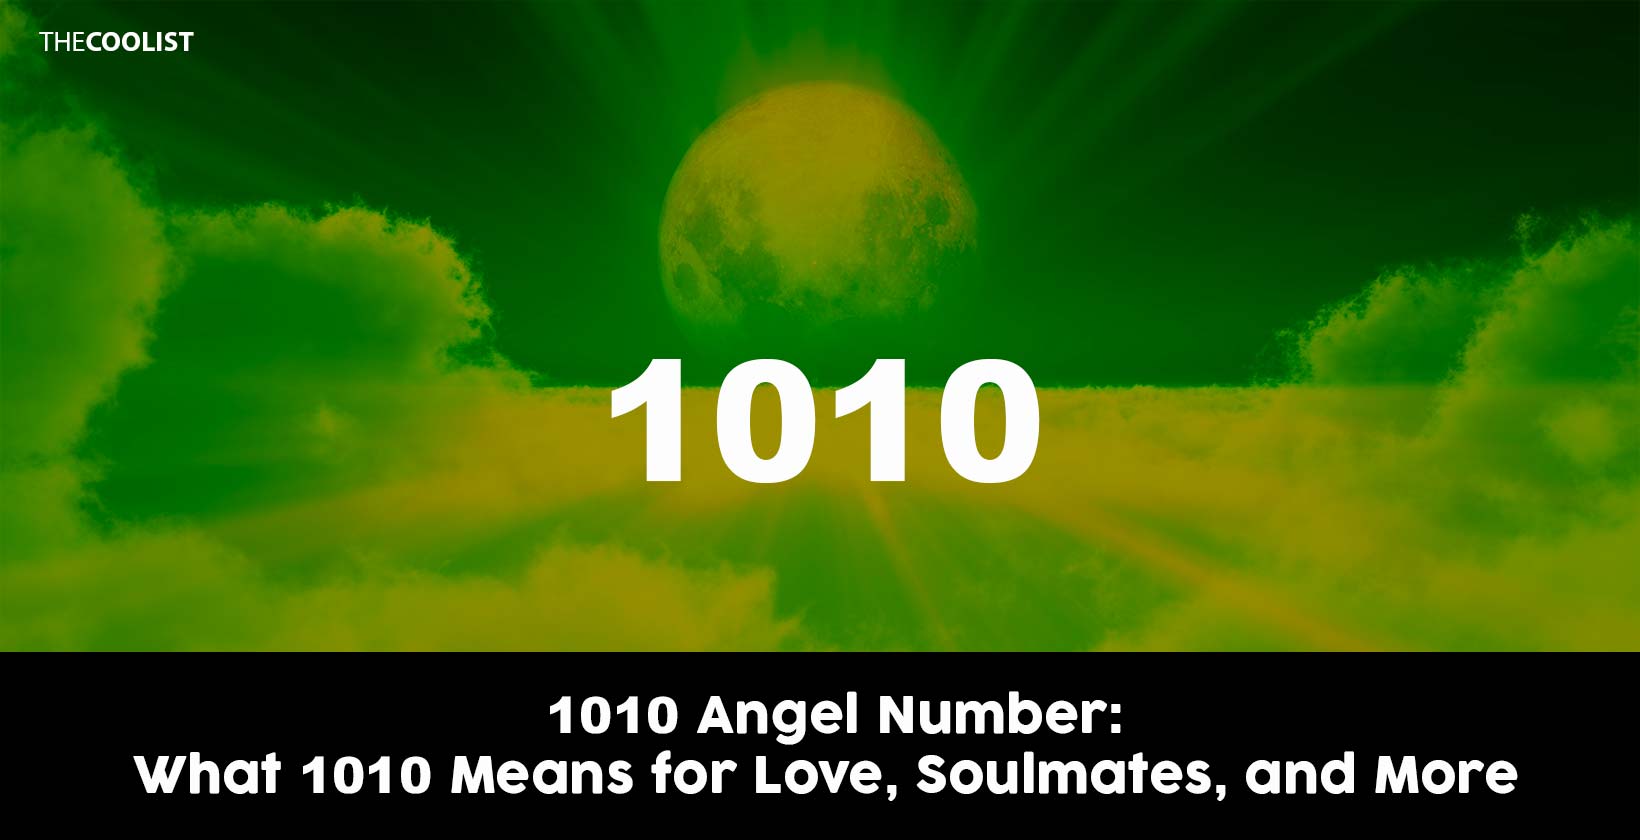 1010 Angel Number: What 1010 Means for Love, Soulmates, and More